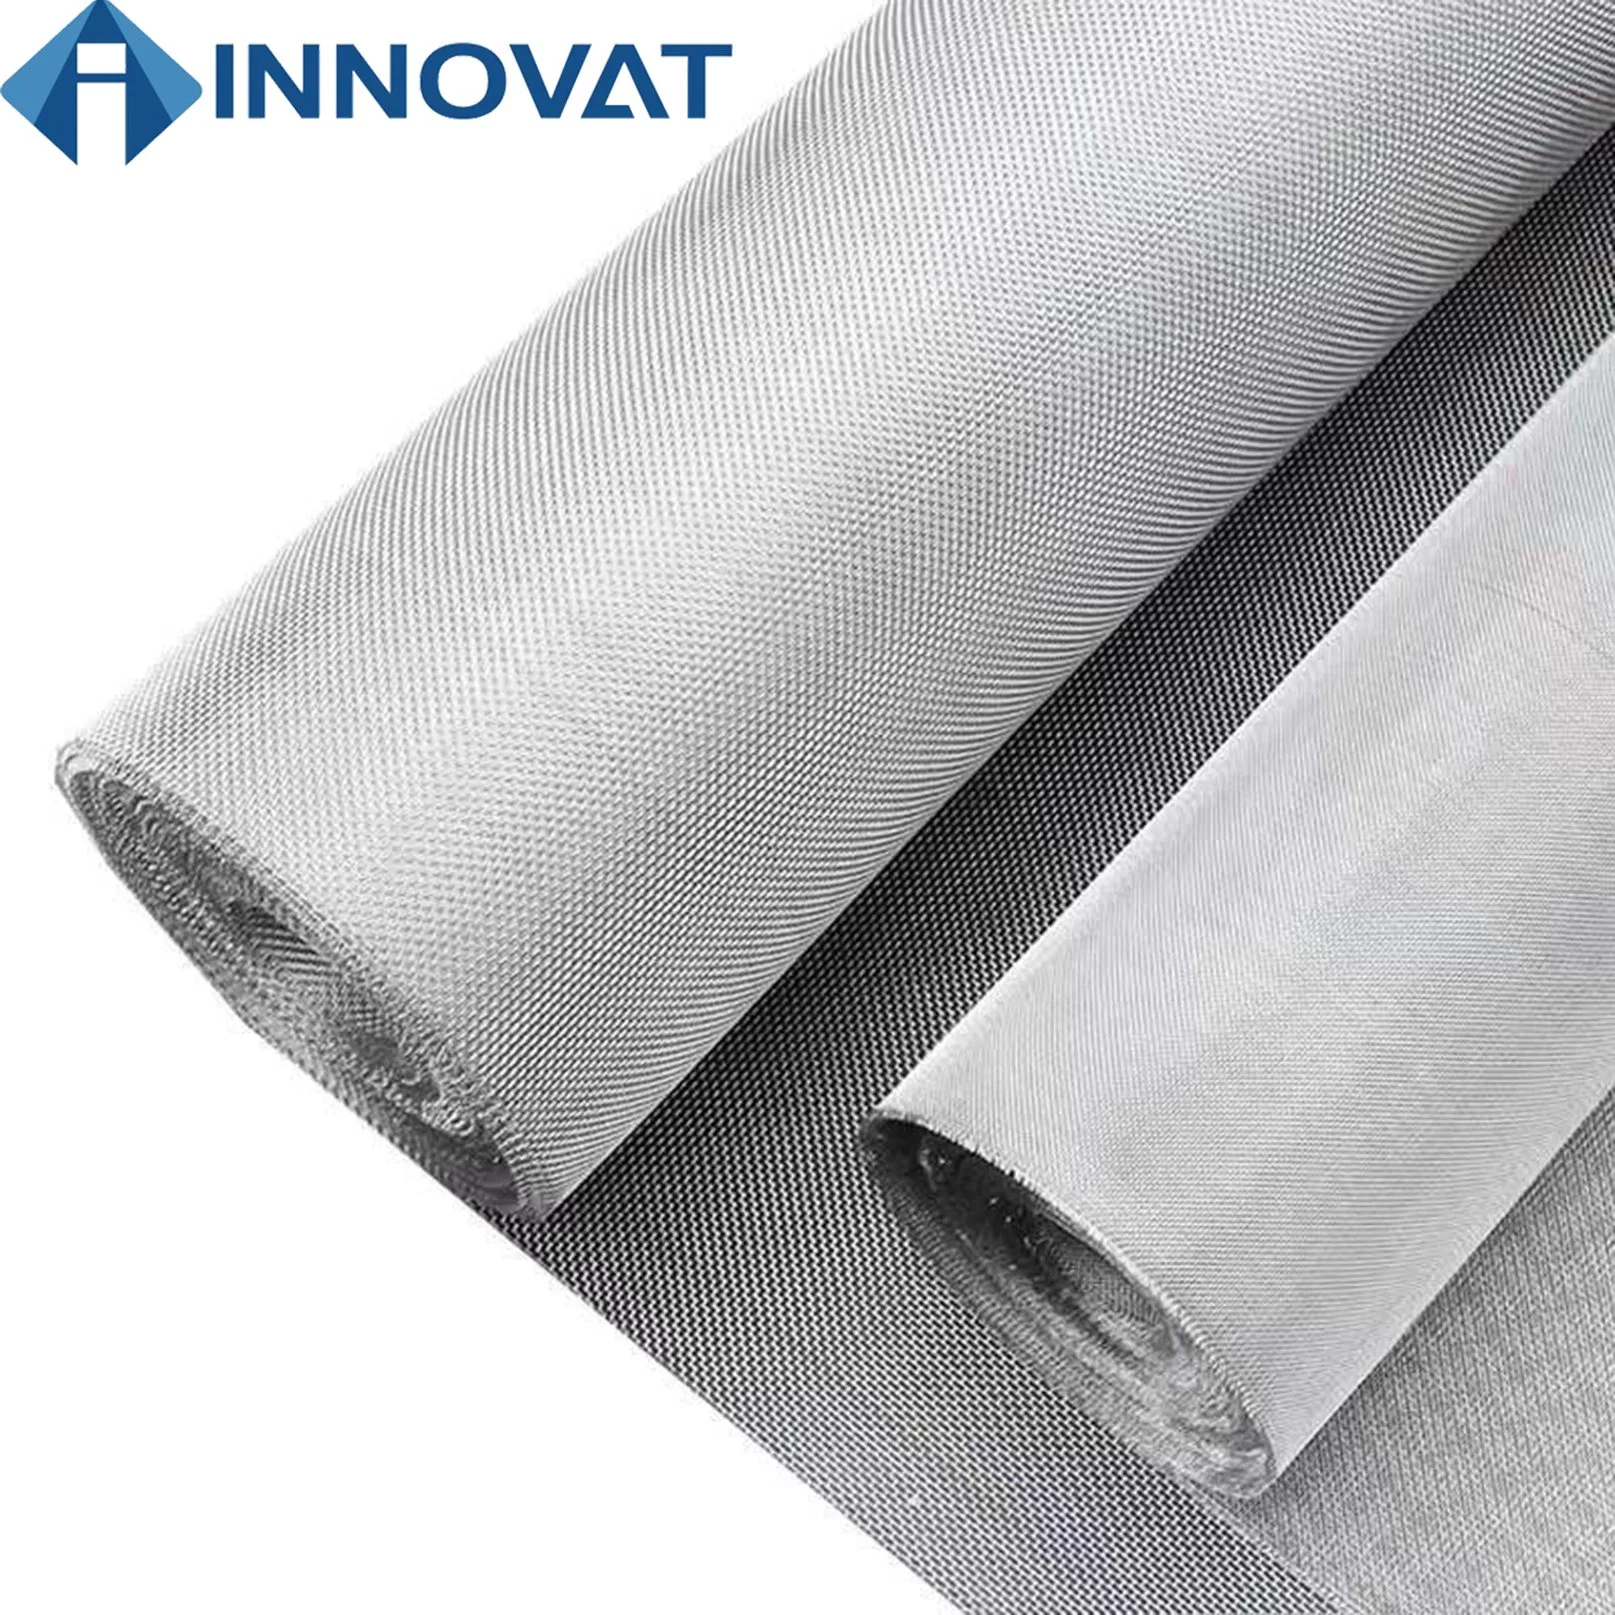 Ss Wire Netting Cloth Ss 304 Insect Net Mosquito Window Screen High Temperature Plain Weave Security Mesh Stainless Steel Wire Cloth Woven 140 150 Micron